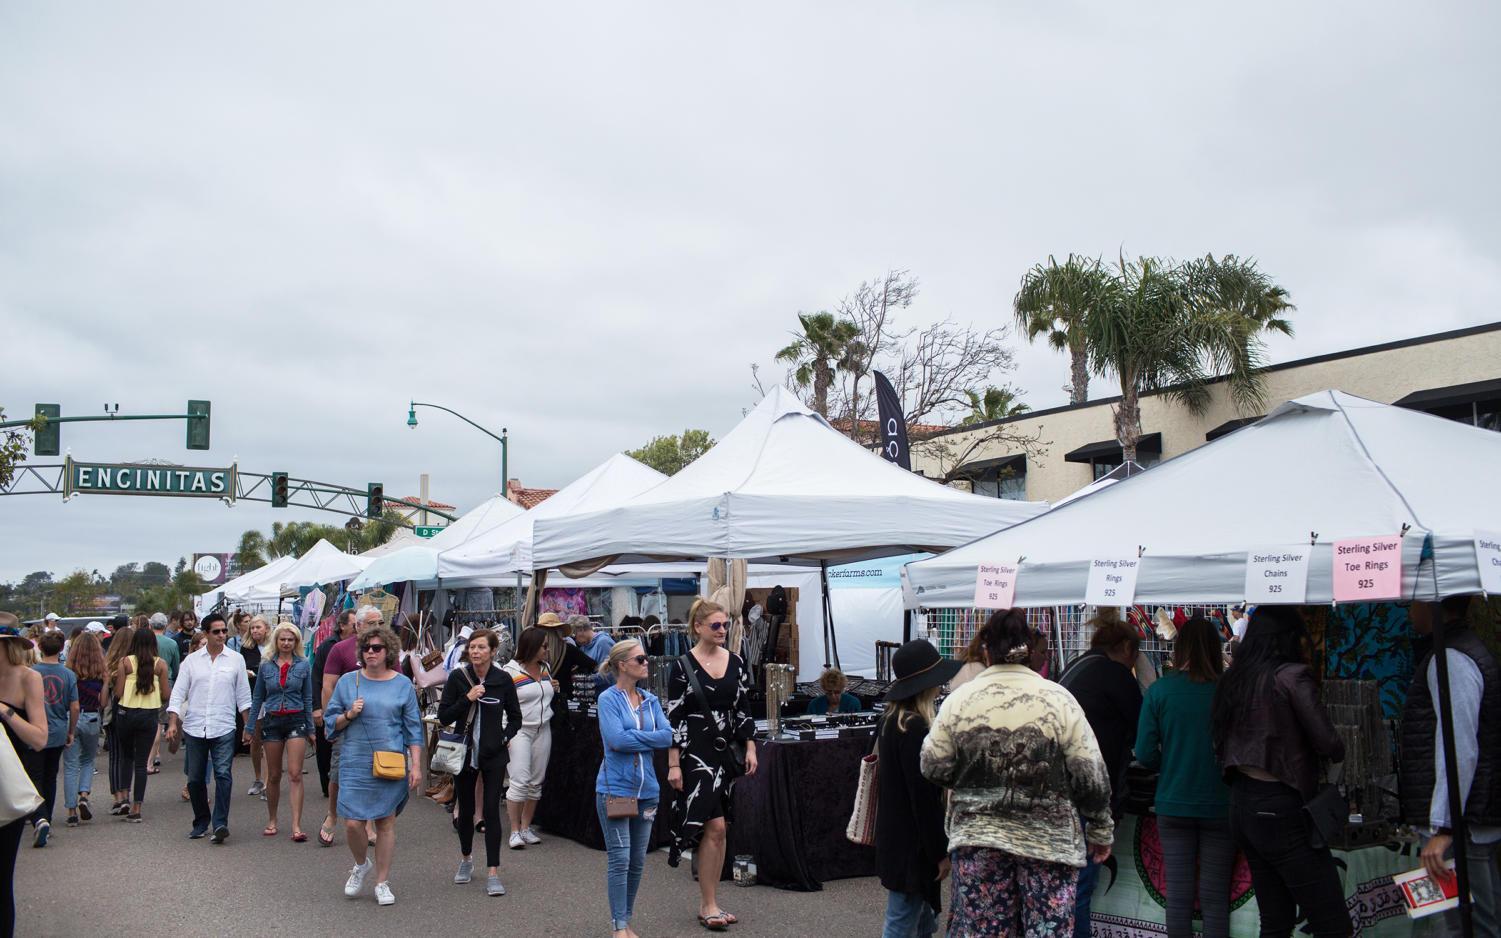 Street+Fair+snapshots%3A+Images+of+Encinitas+annual+spring+event